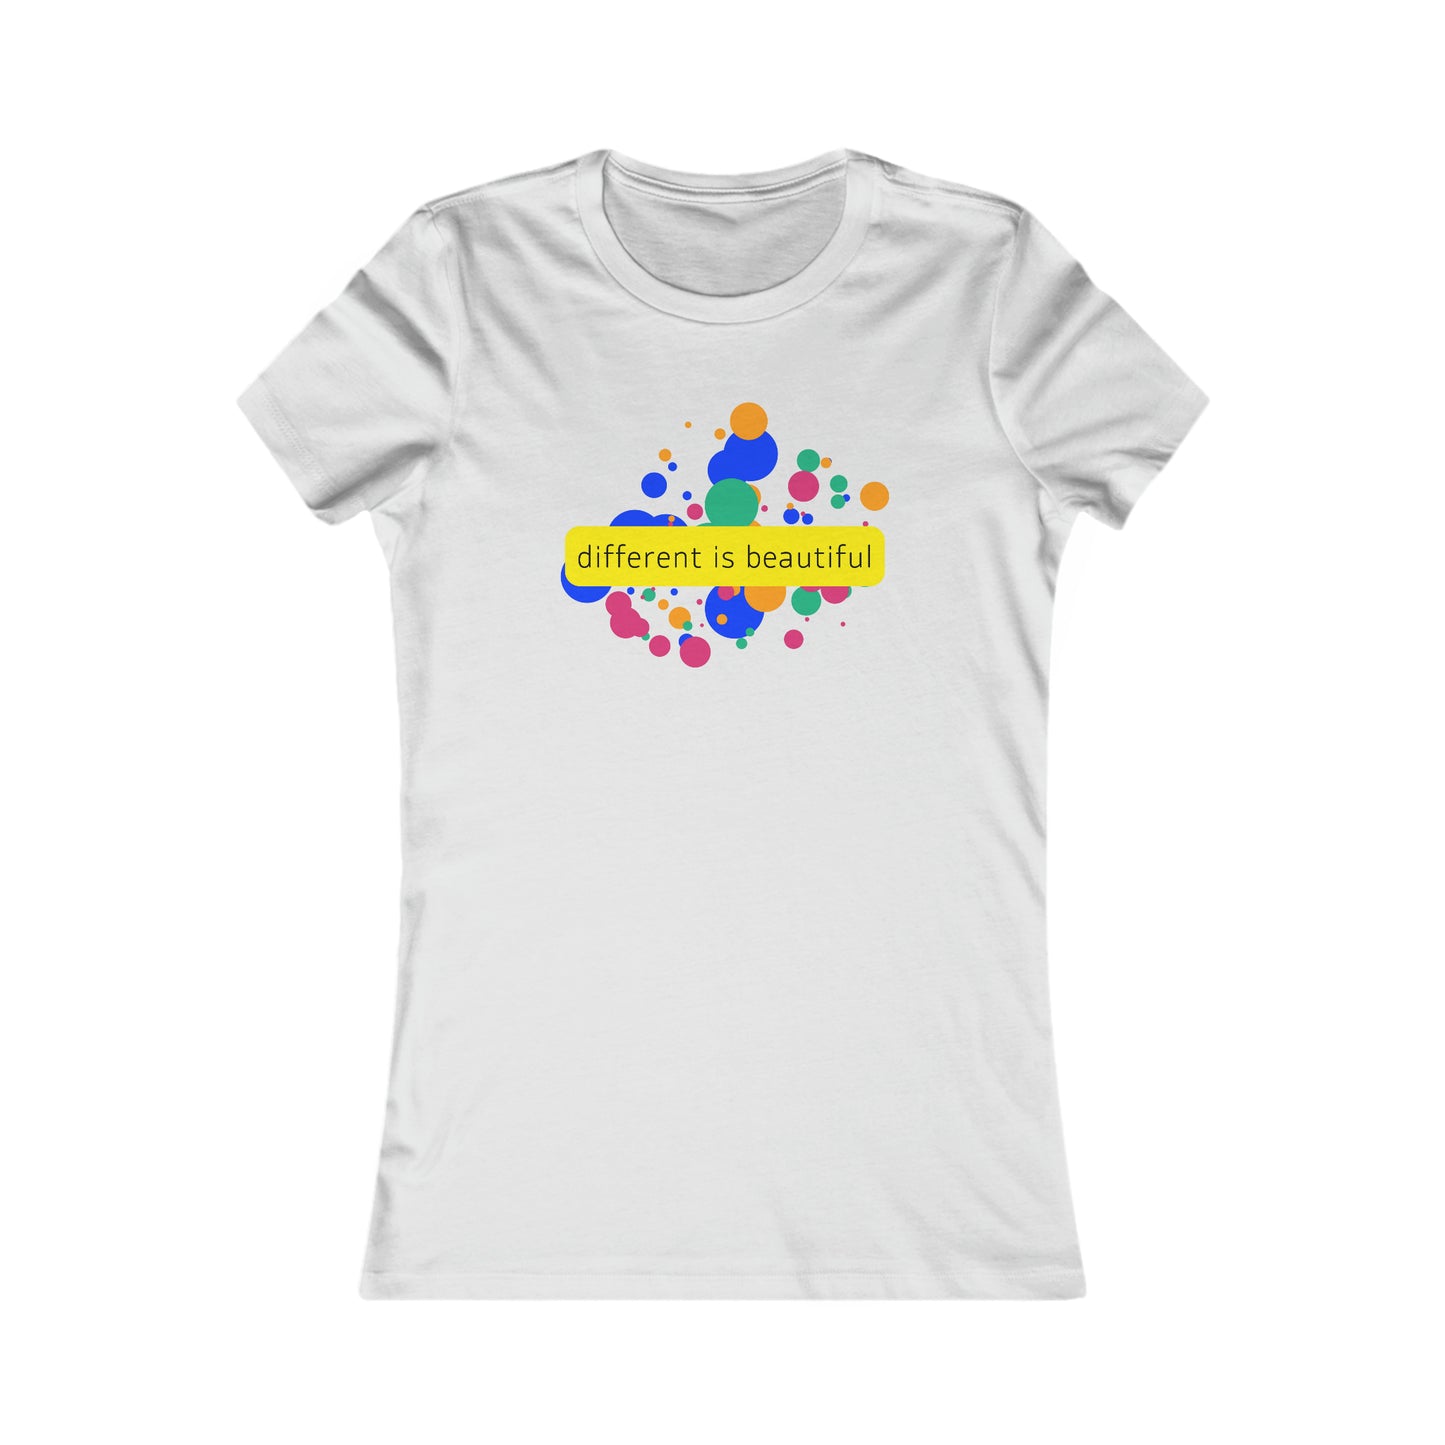 “different is beautiful” message on this colorfully designed Women's Favorite Tee. Slim fit so please check the size table.